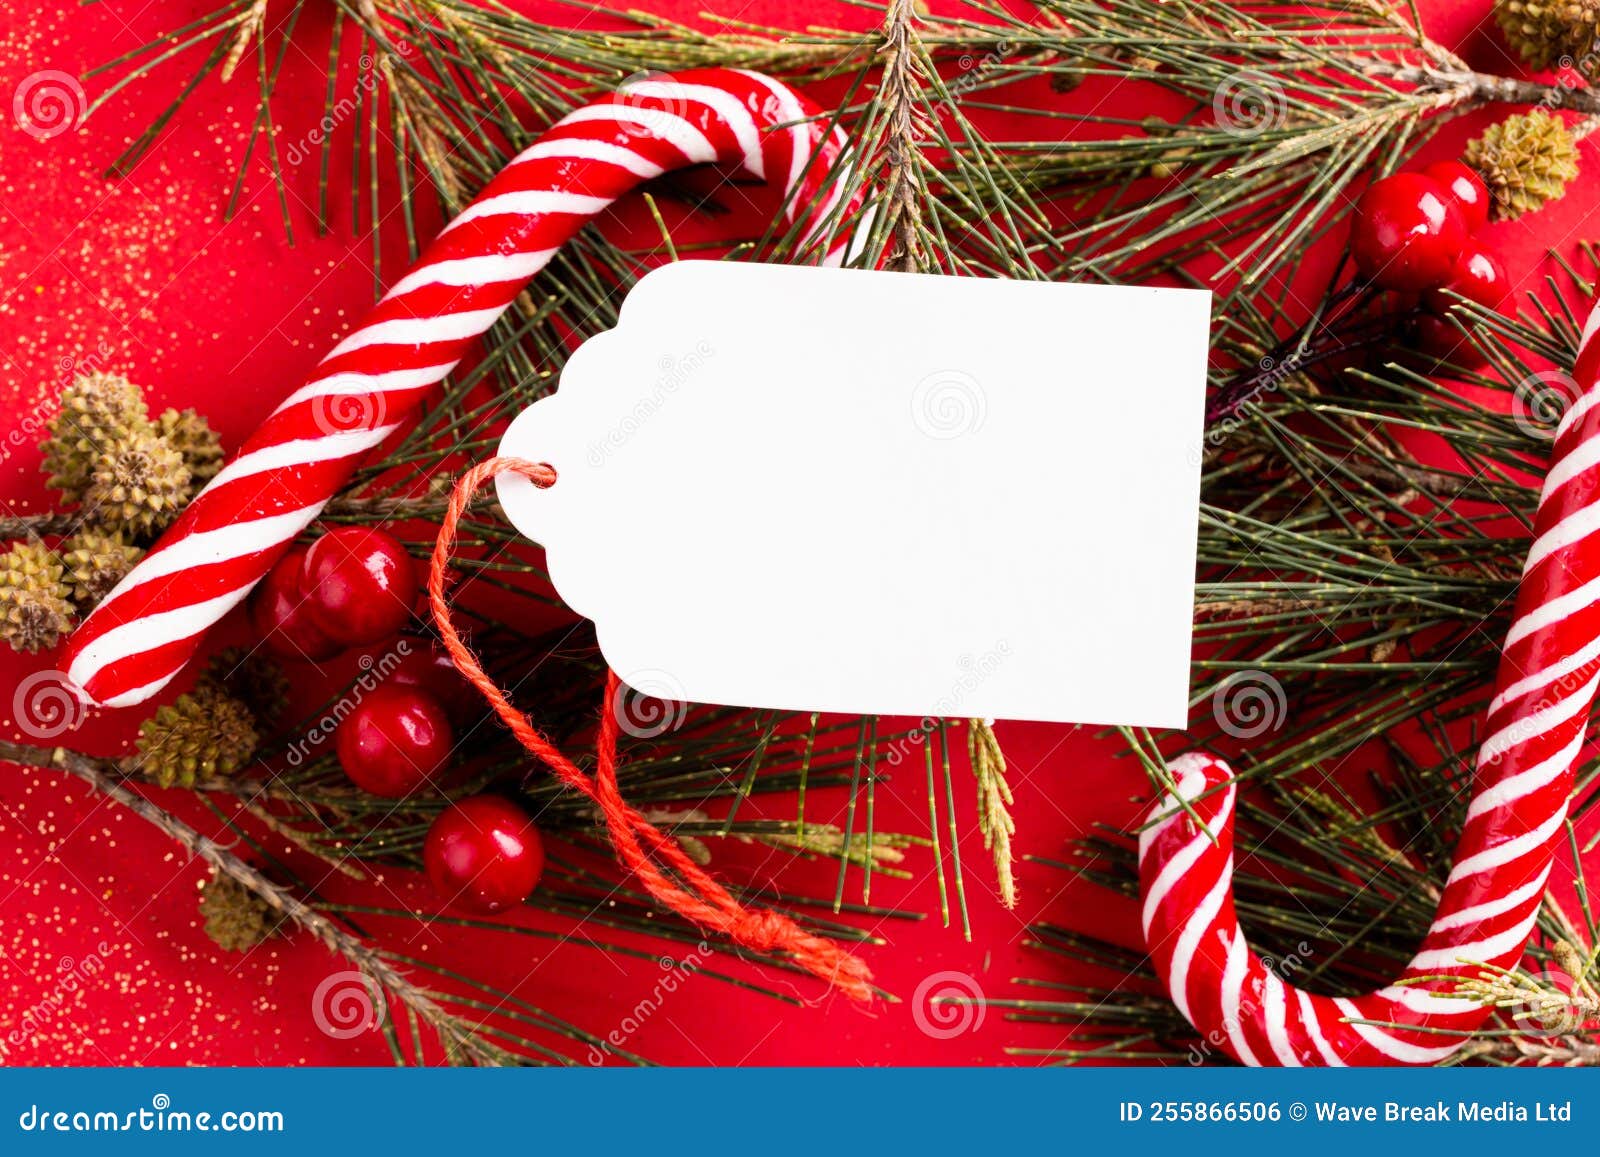 Image of Christmas Decoration with Gif Tag and Copy Space on Red Background  Stock Photo - Image of vector, decoration: 255866506